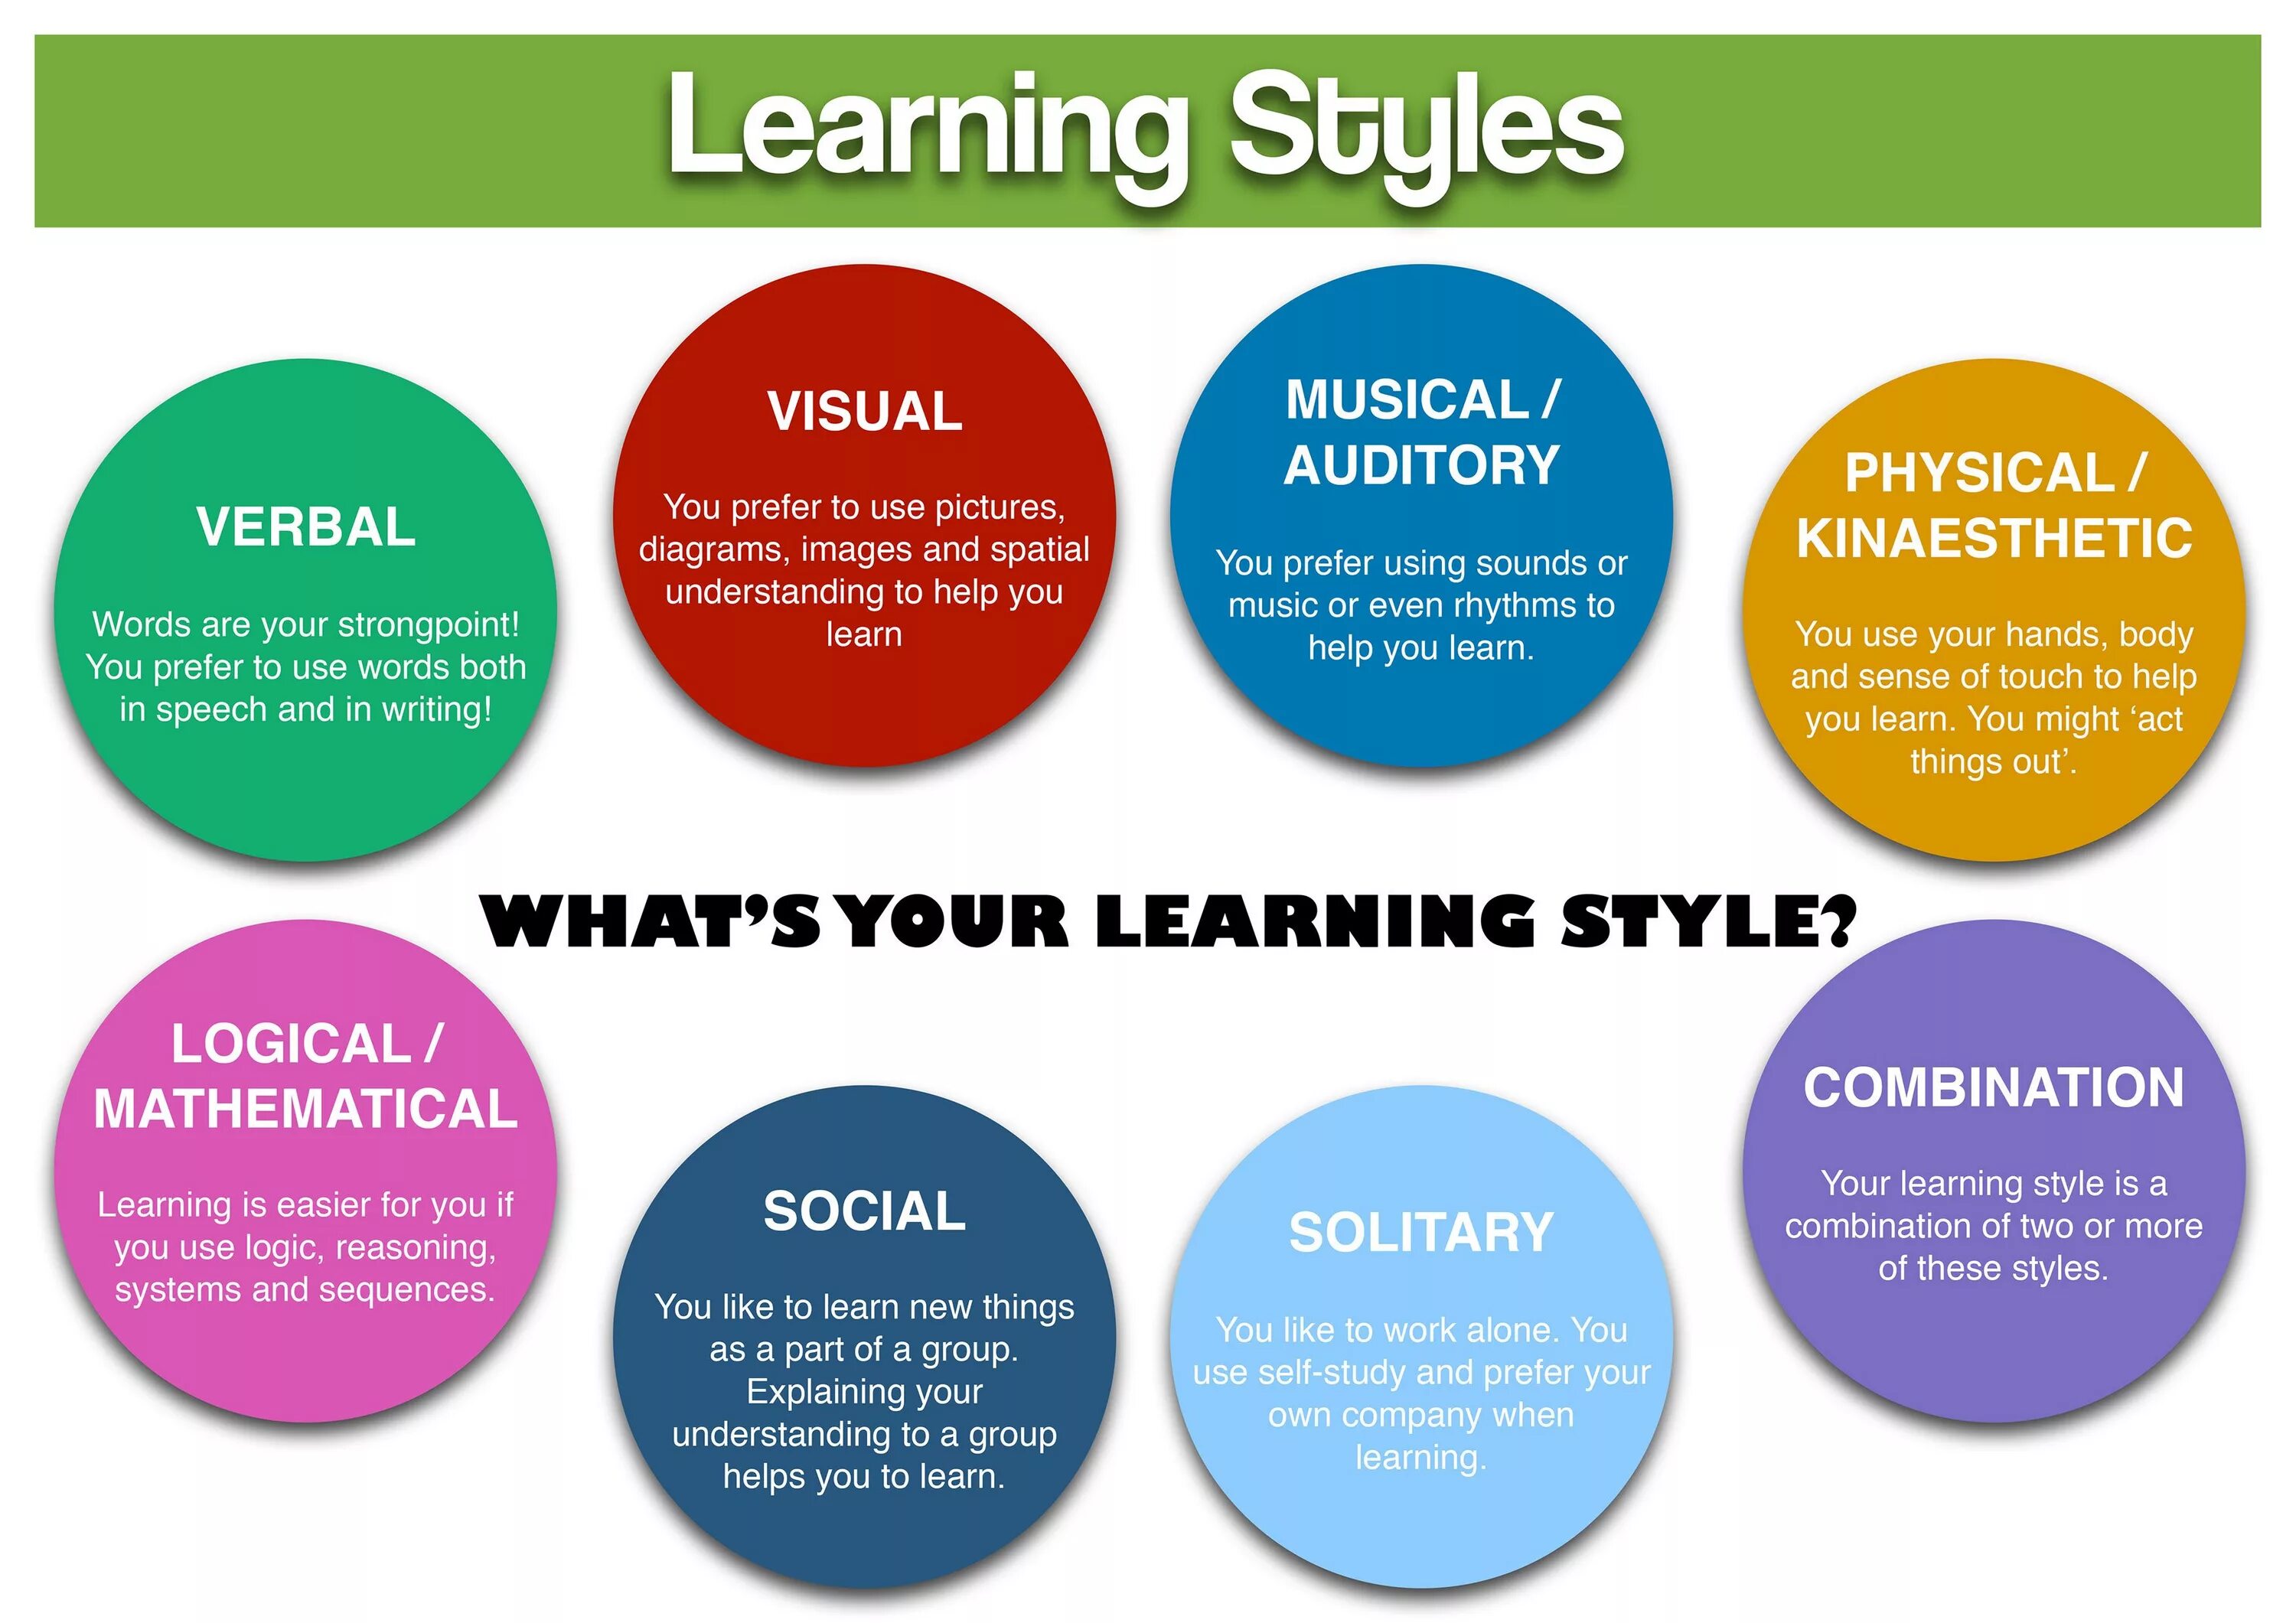 Learning Styles. Types of Learning Styles. Different Learning Styles. Learning Styles and Strategies. What do you make of those